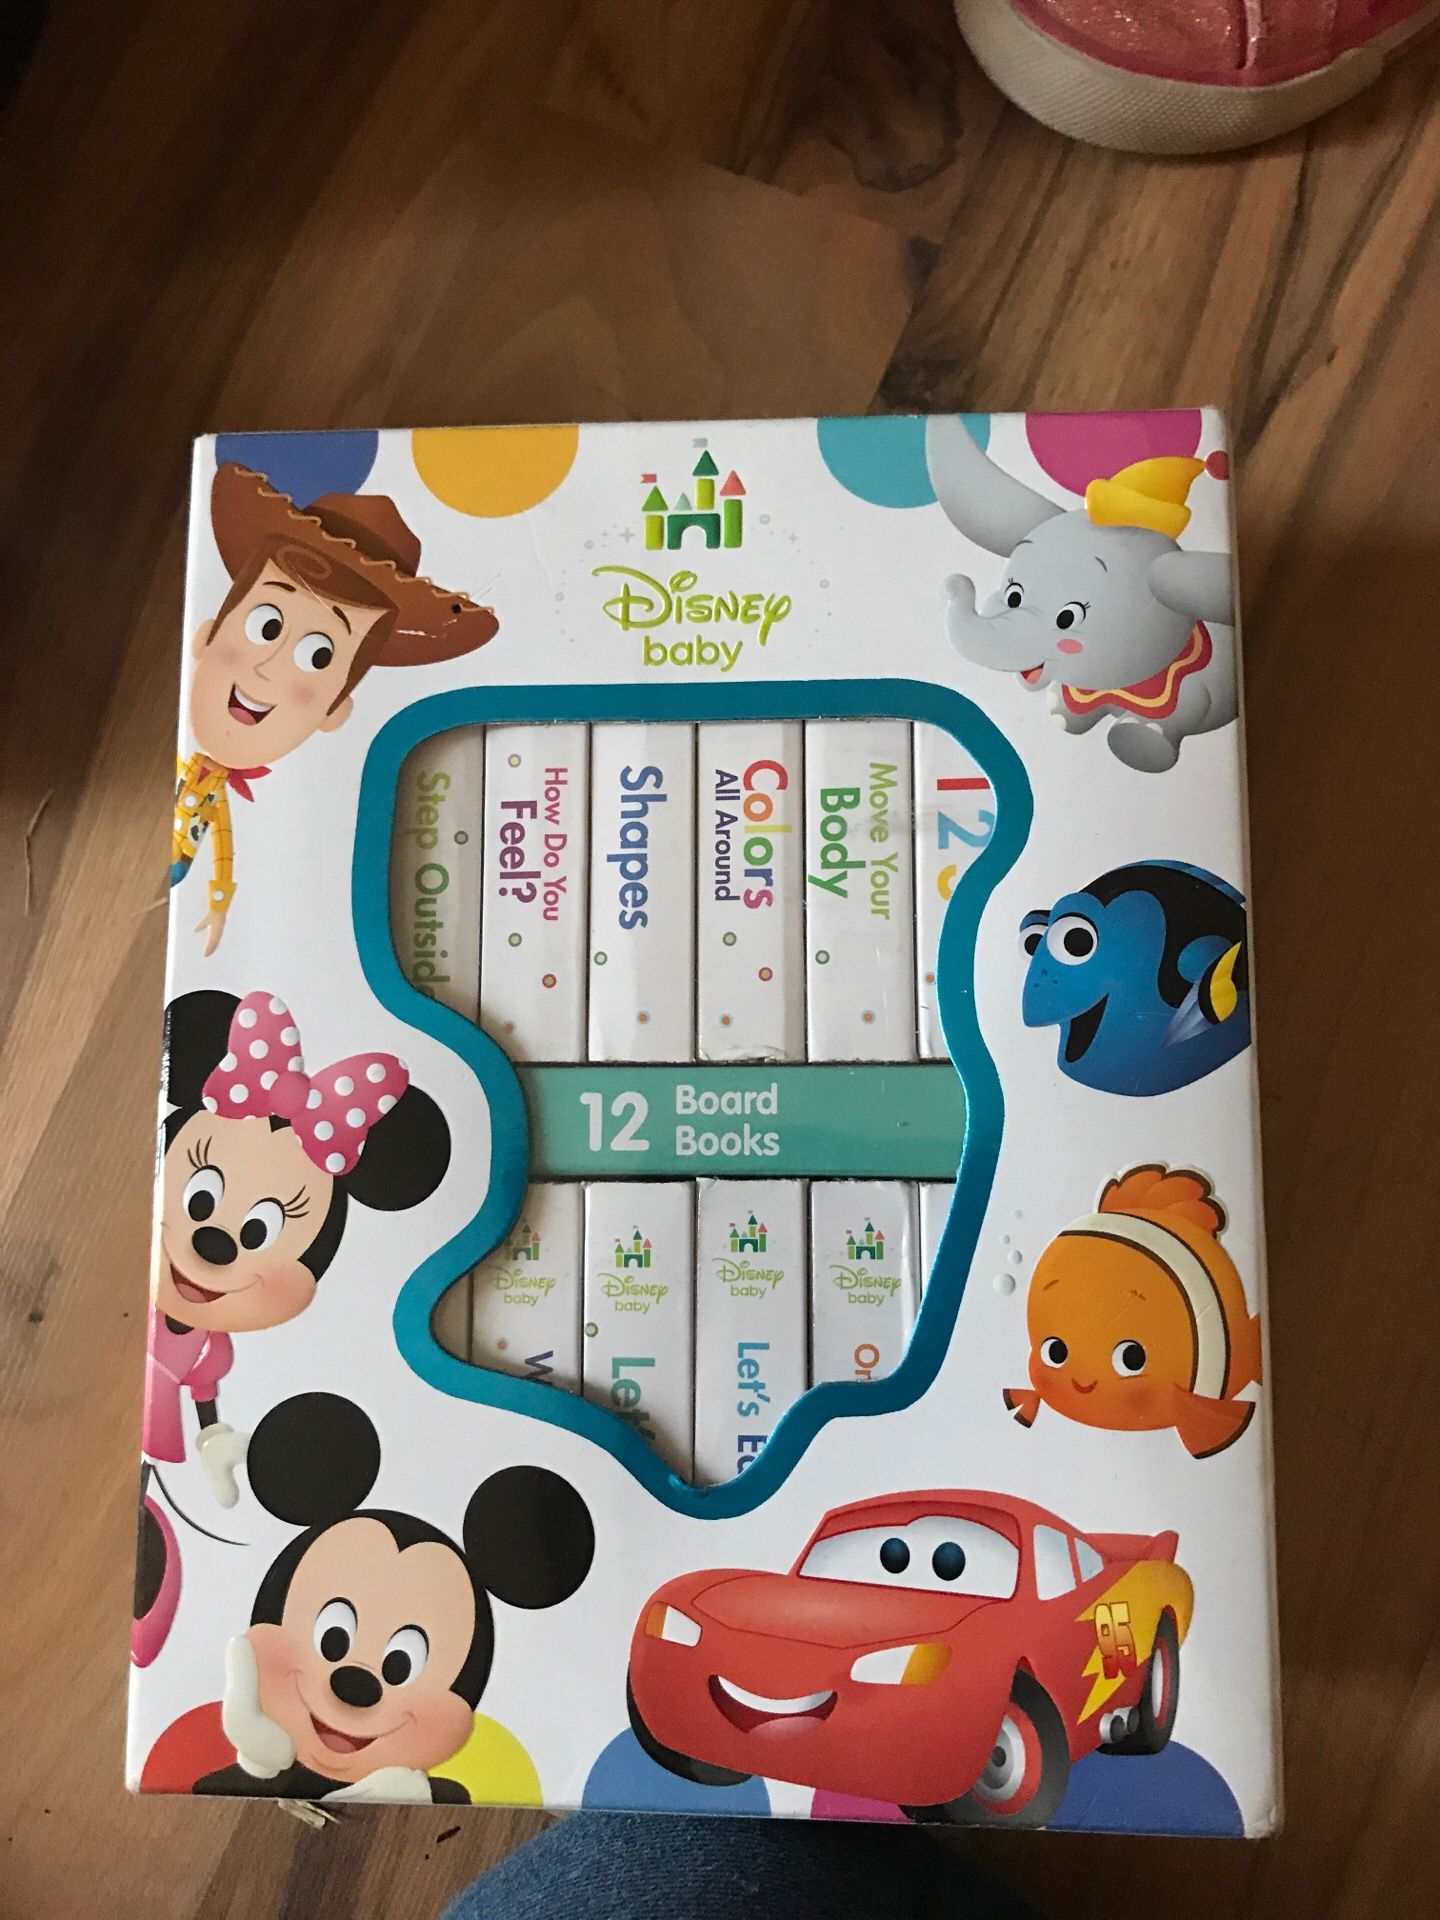 Disney Baby board books with case. Set of 12 books